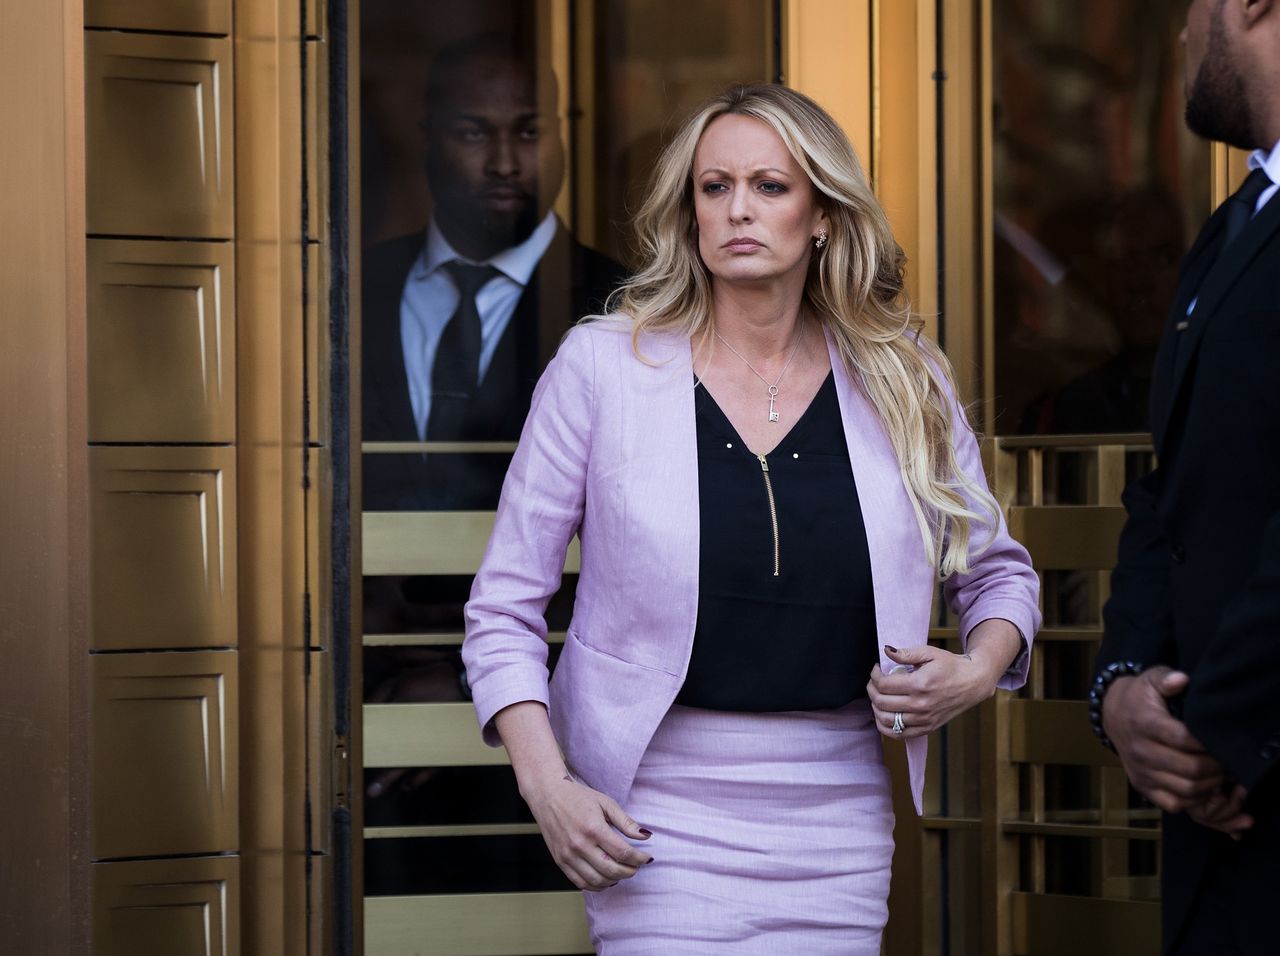 The trial against Donald Trump is starting. The case concerns the payment for the silence of adult film actress, Stormy Daniels.